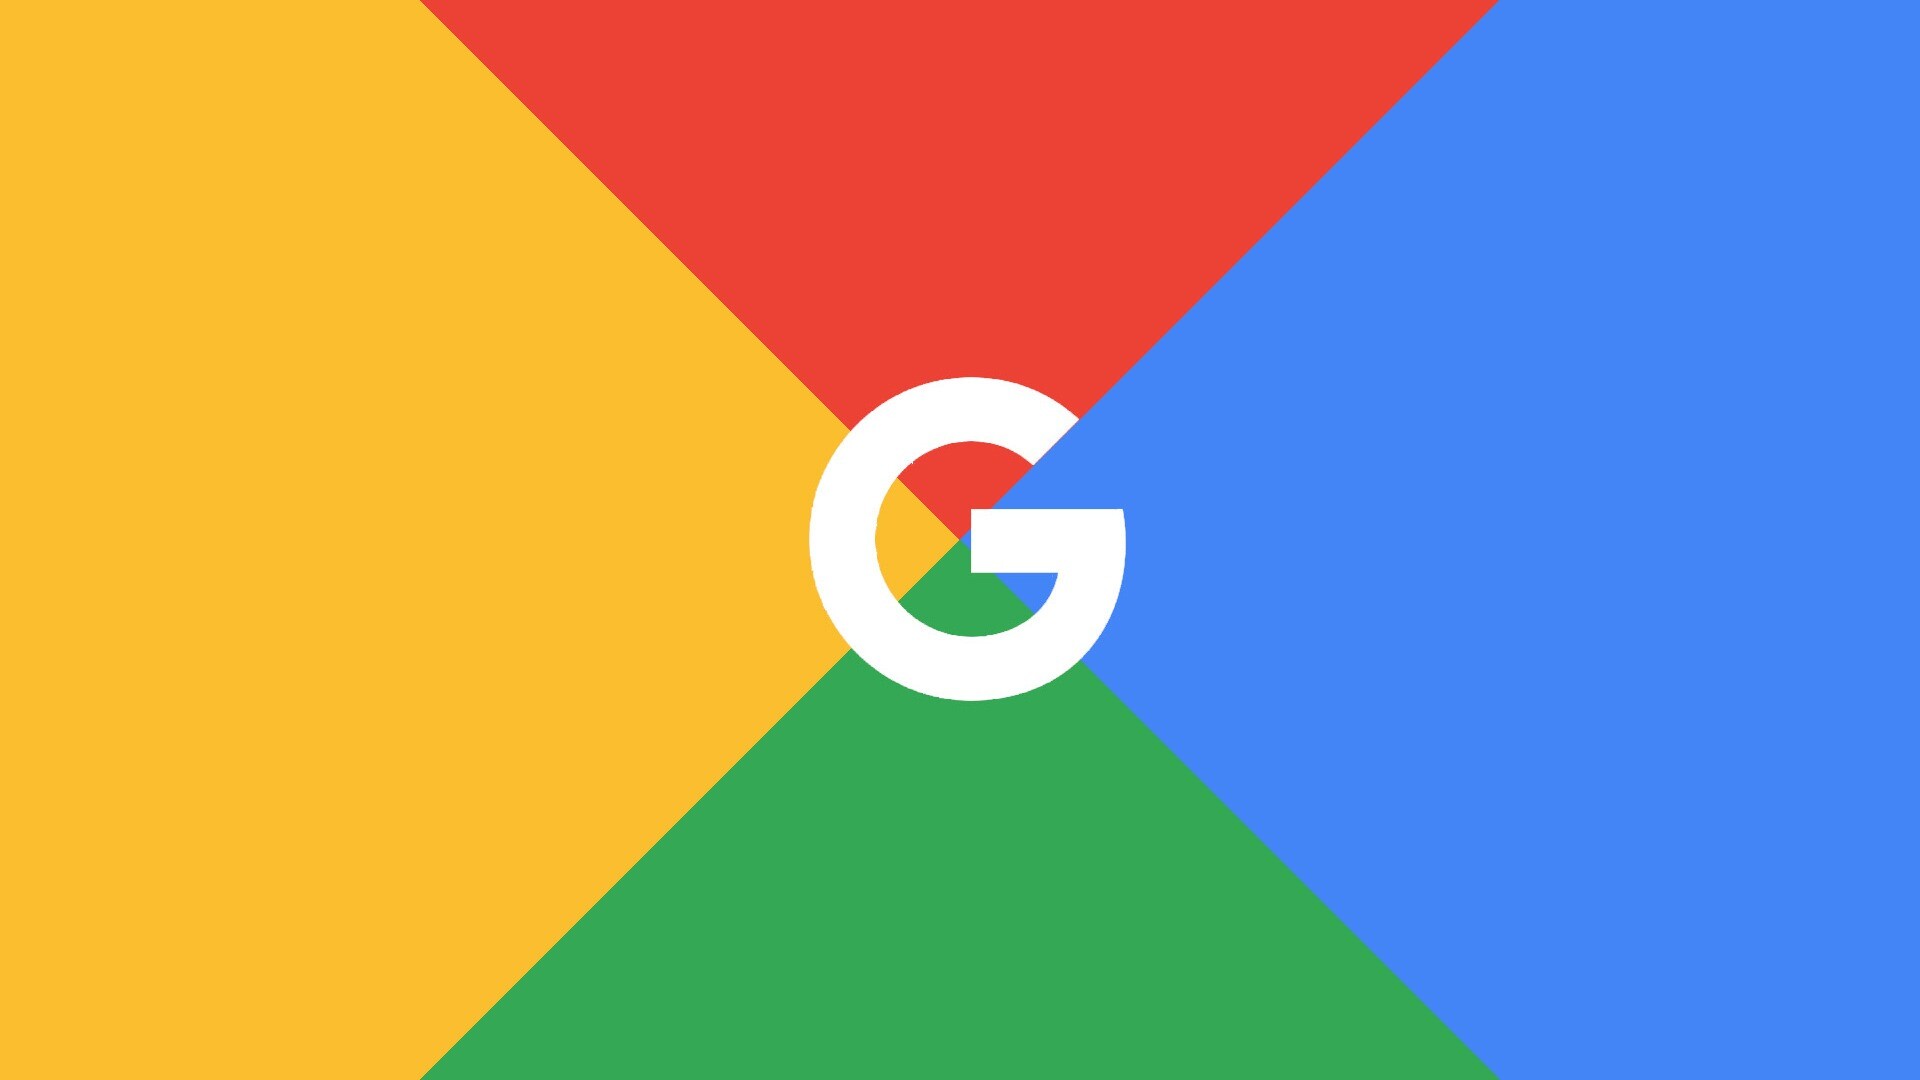 Google: Ranked second by on the Forbes list of most valuable brands. 1920x1080 Full HD Wallpaper.